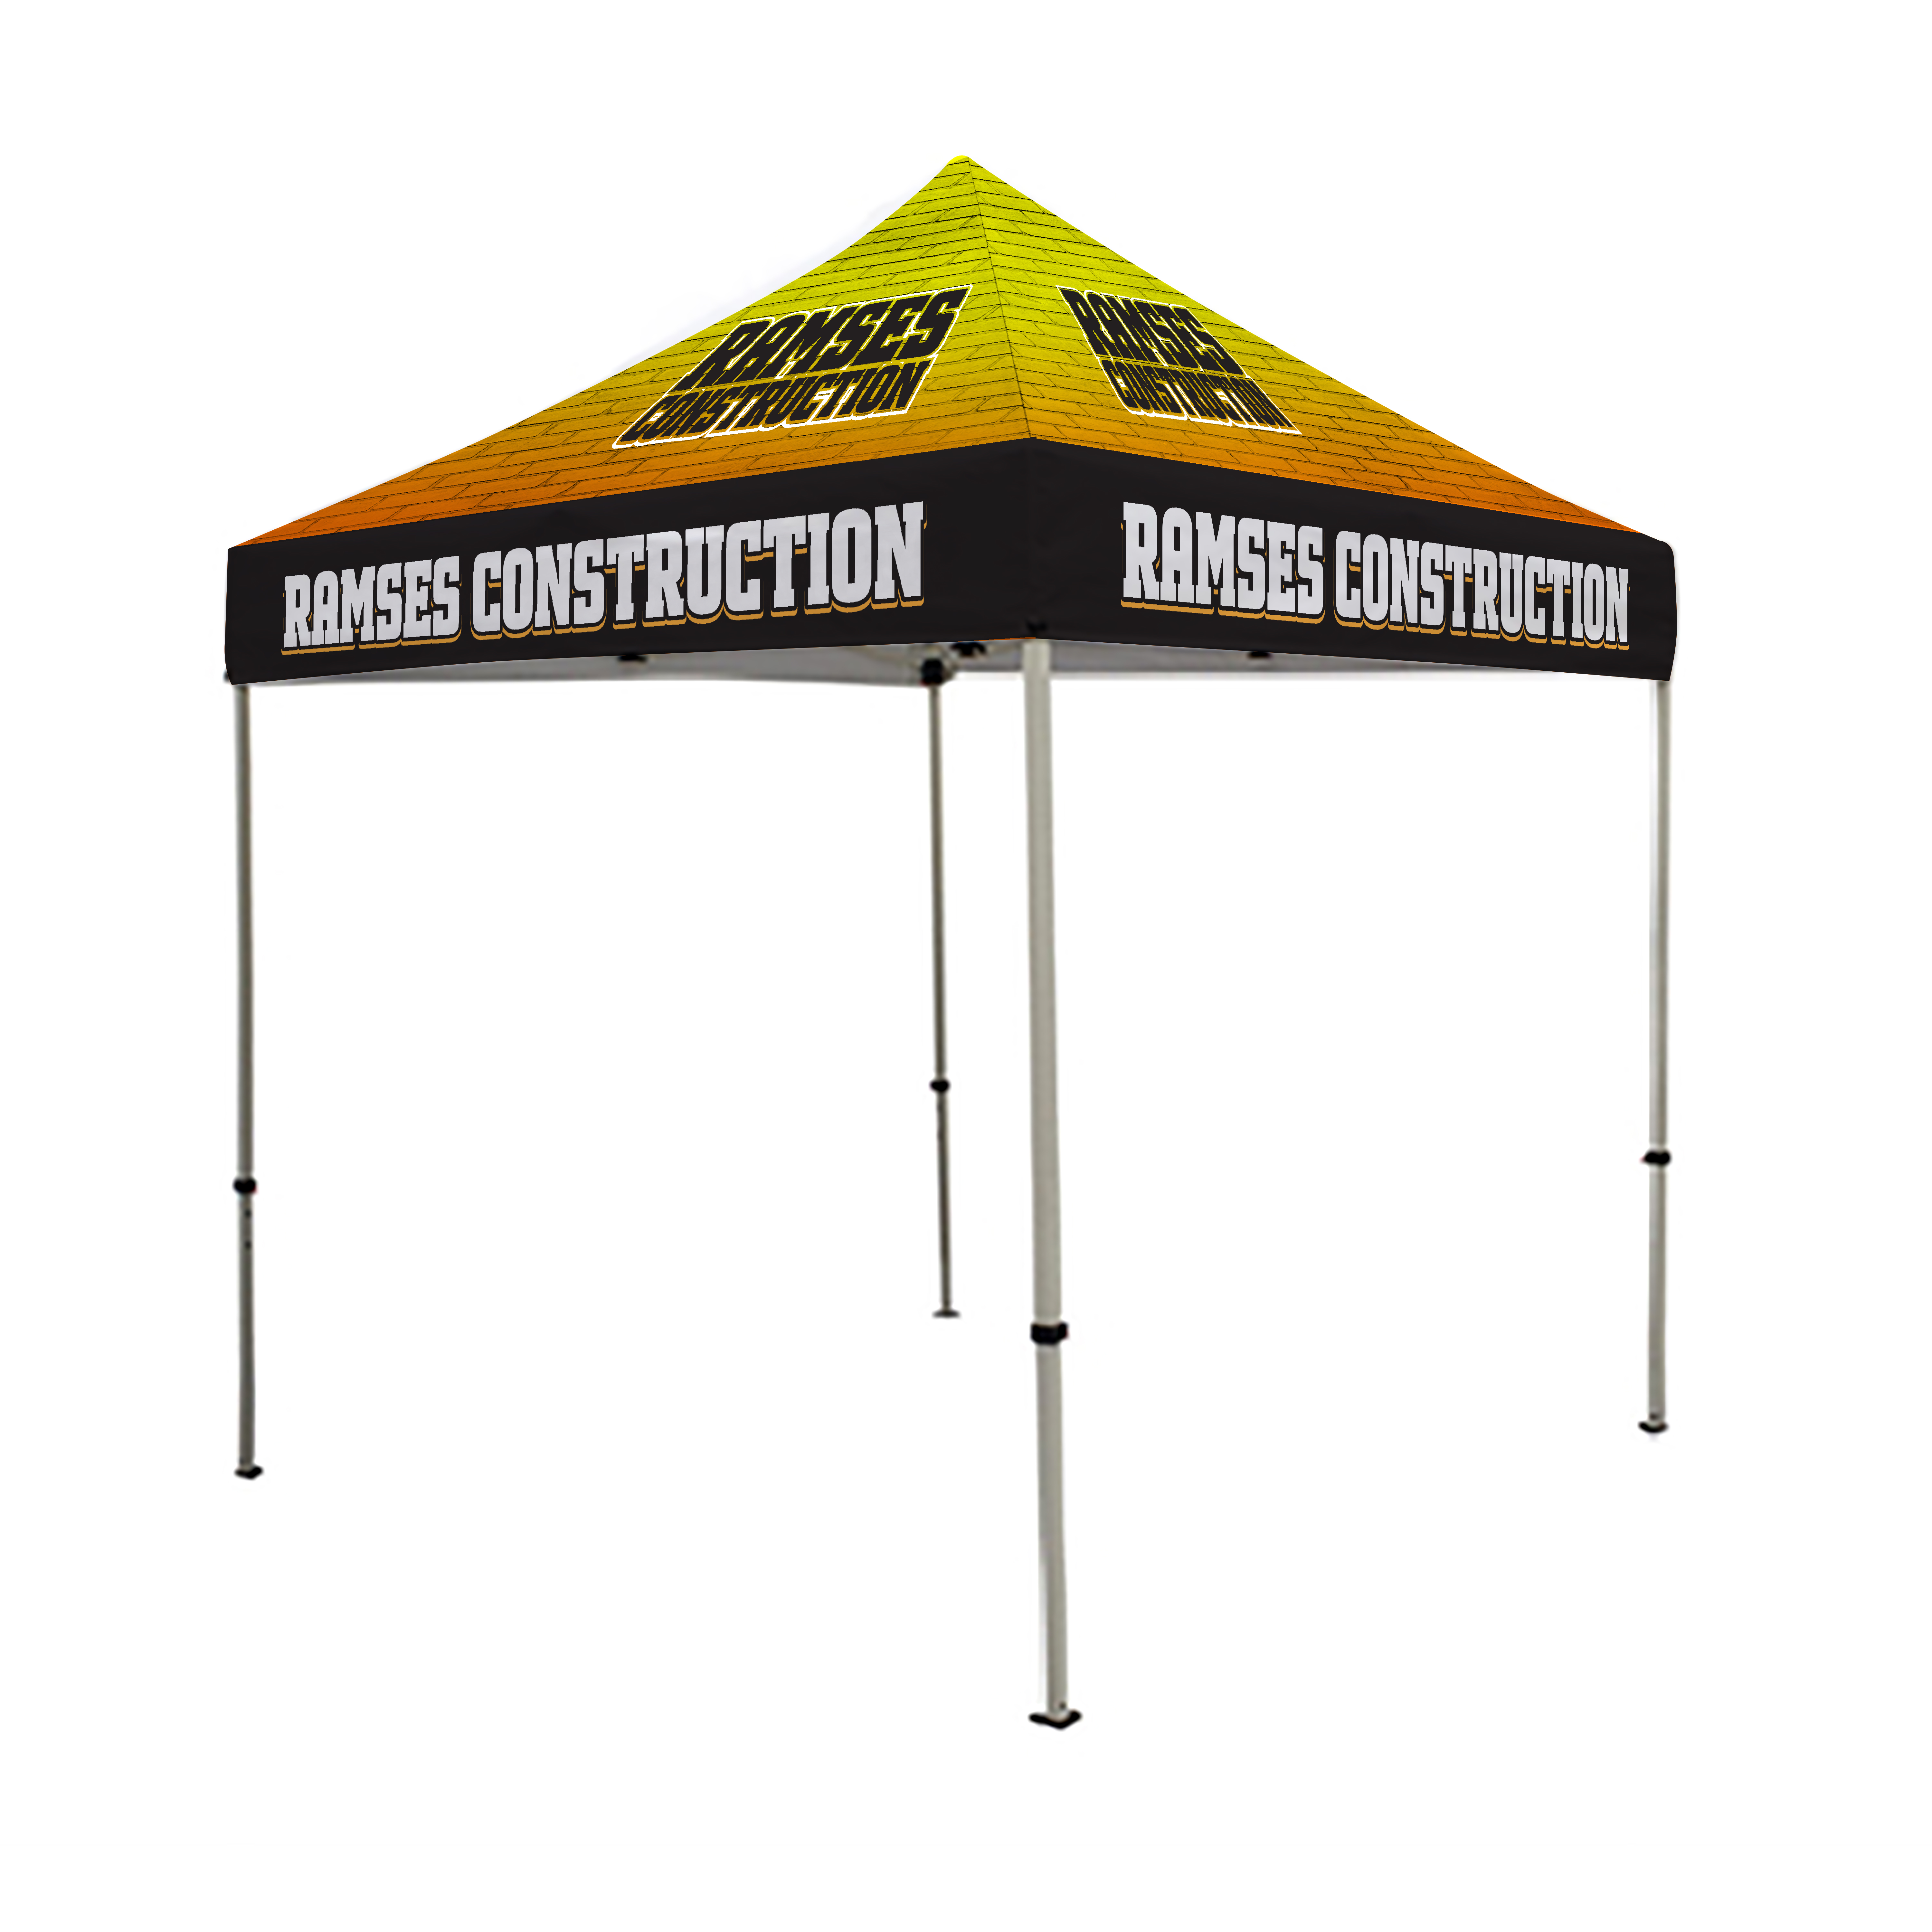 8ft Pop Up Canopy (Steel) - Full Color